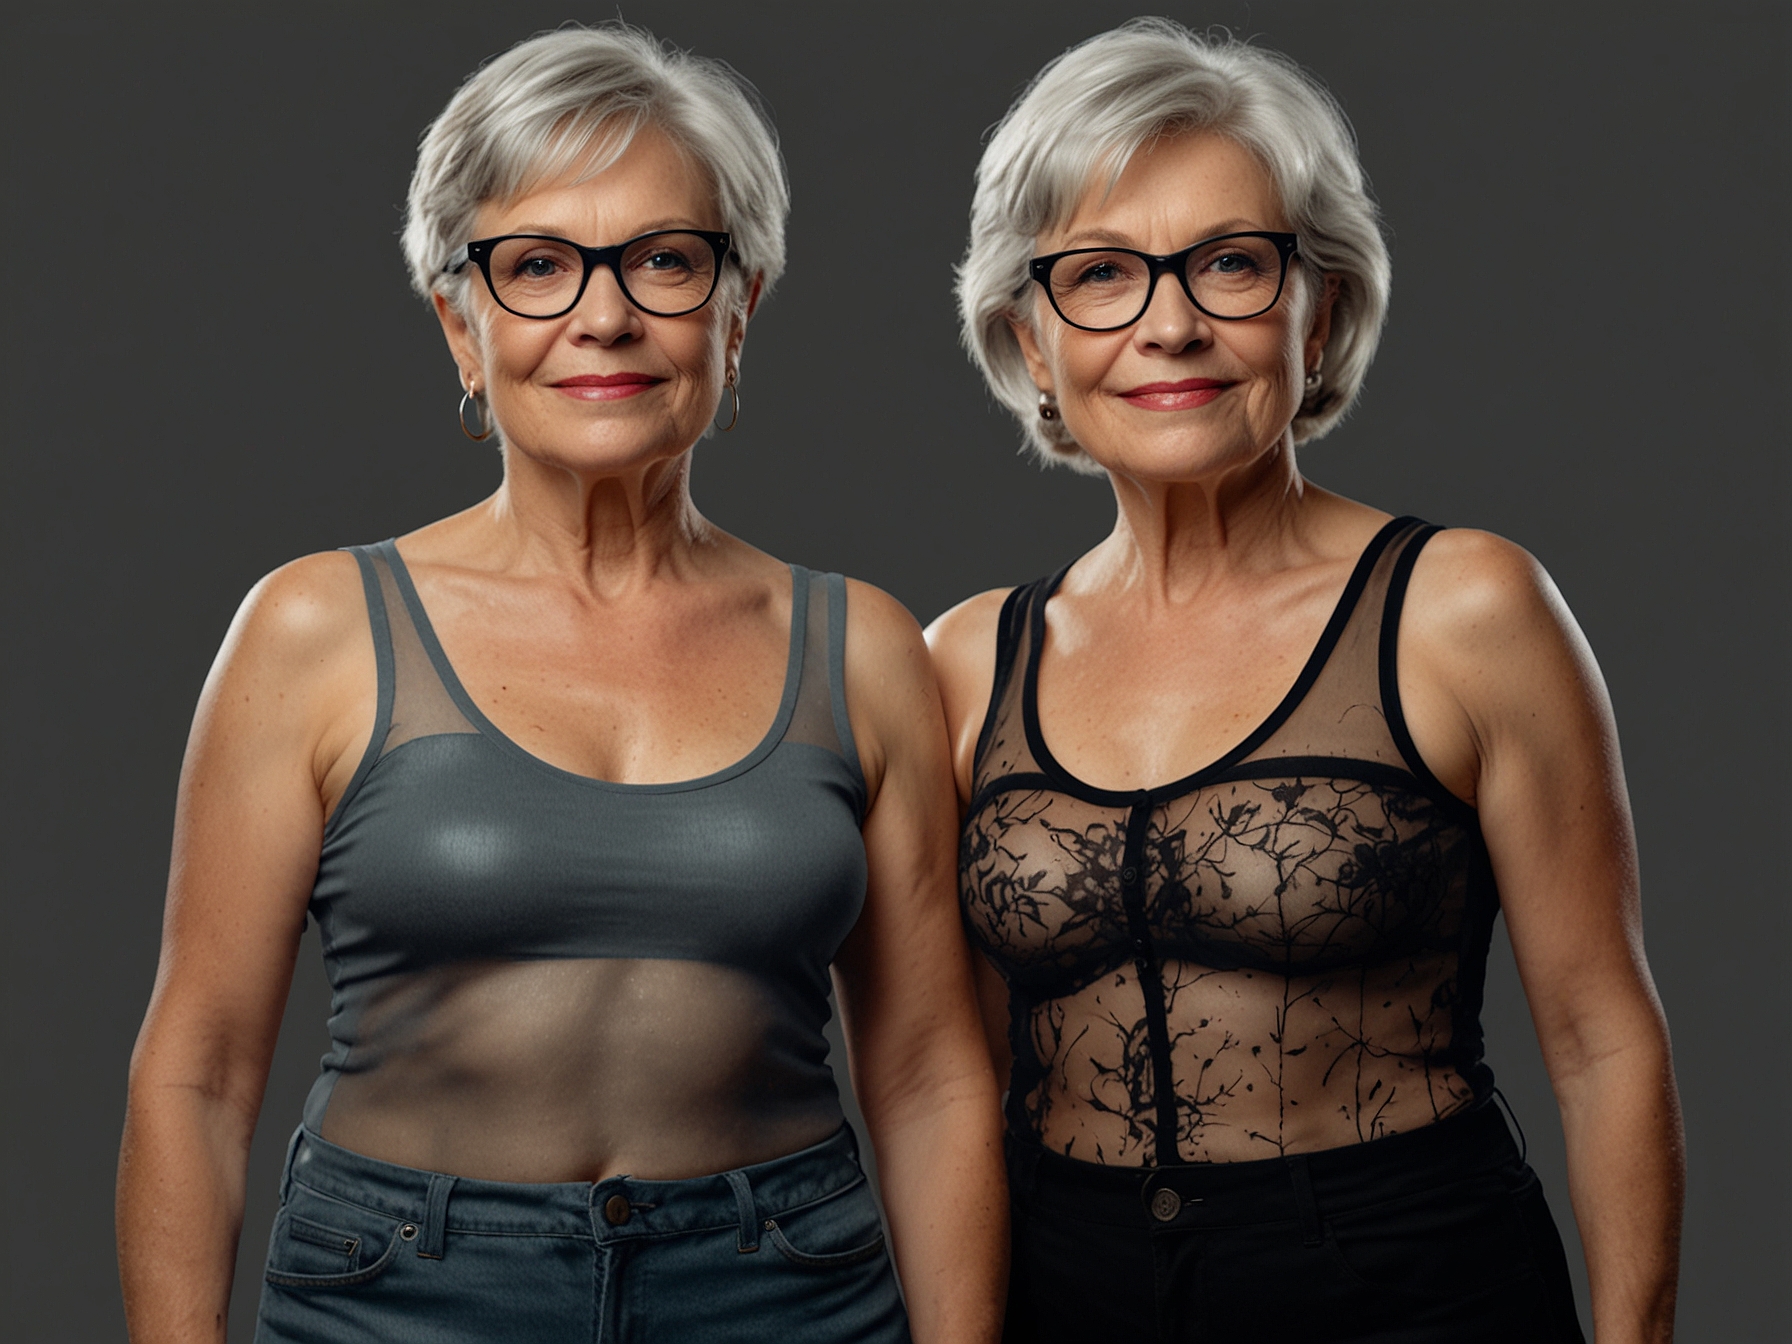 Two women in their 60s confidently posing in see-through tops, challenging societal norms about aging.